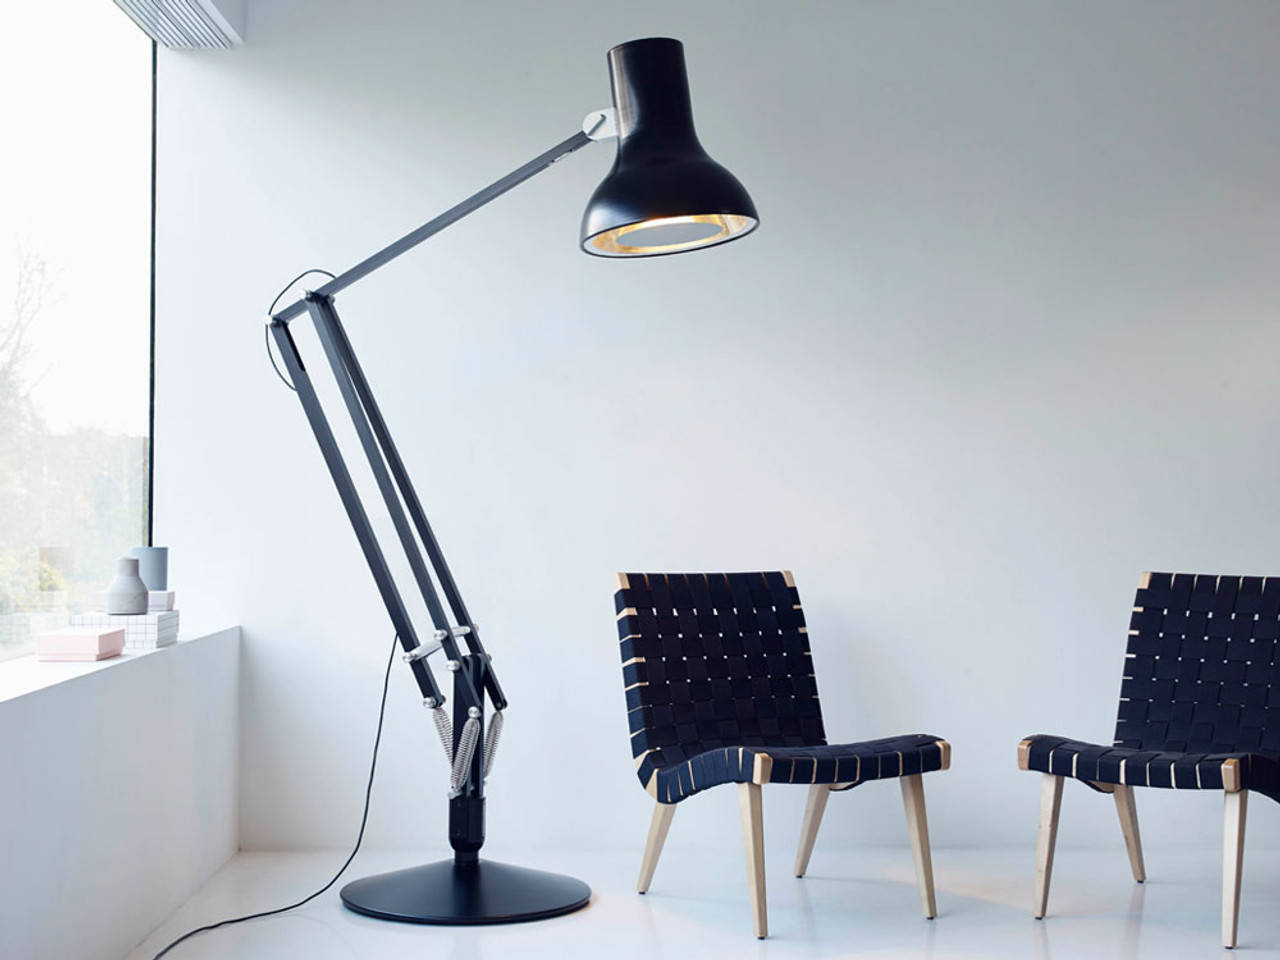 Anglepoise Type 75 Giant Floor Lamp by Sir Kenneth Grange